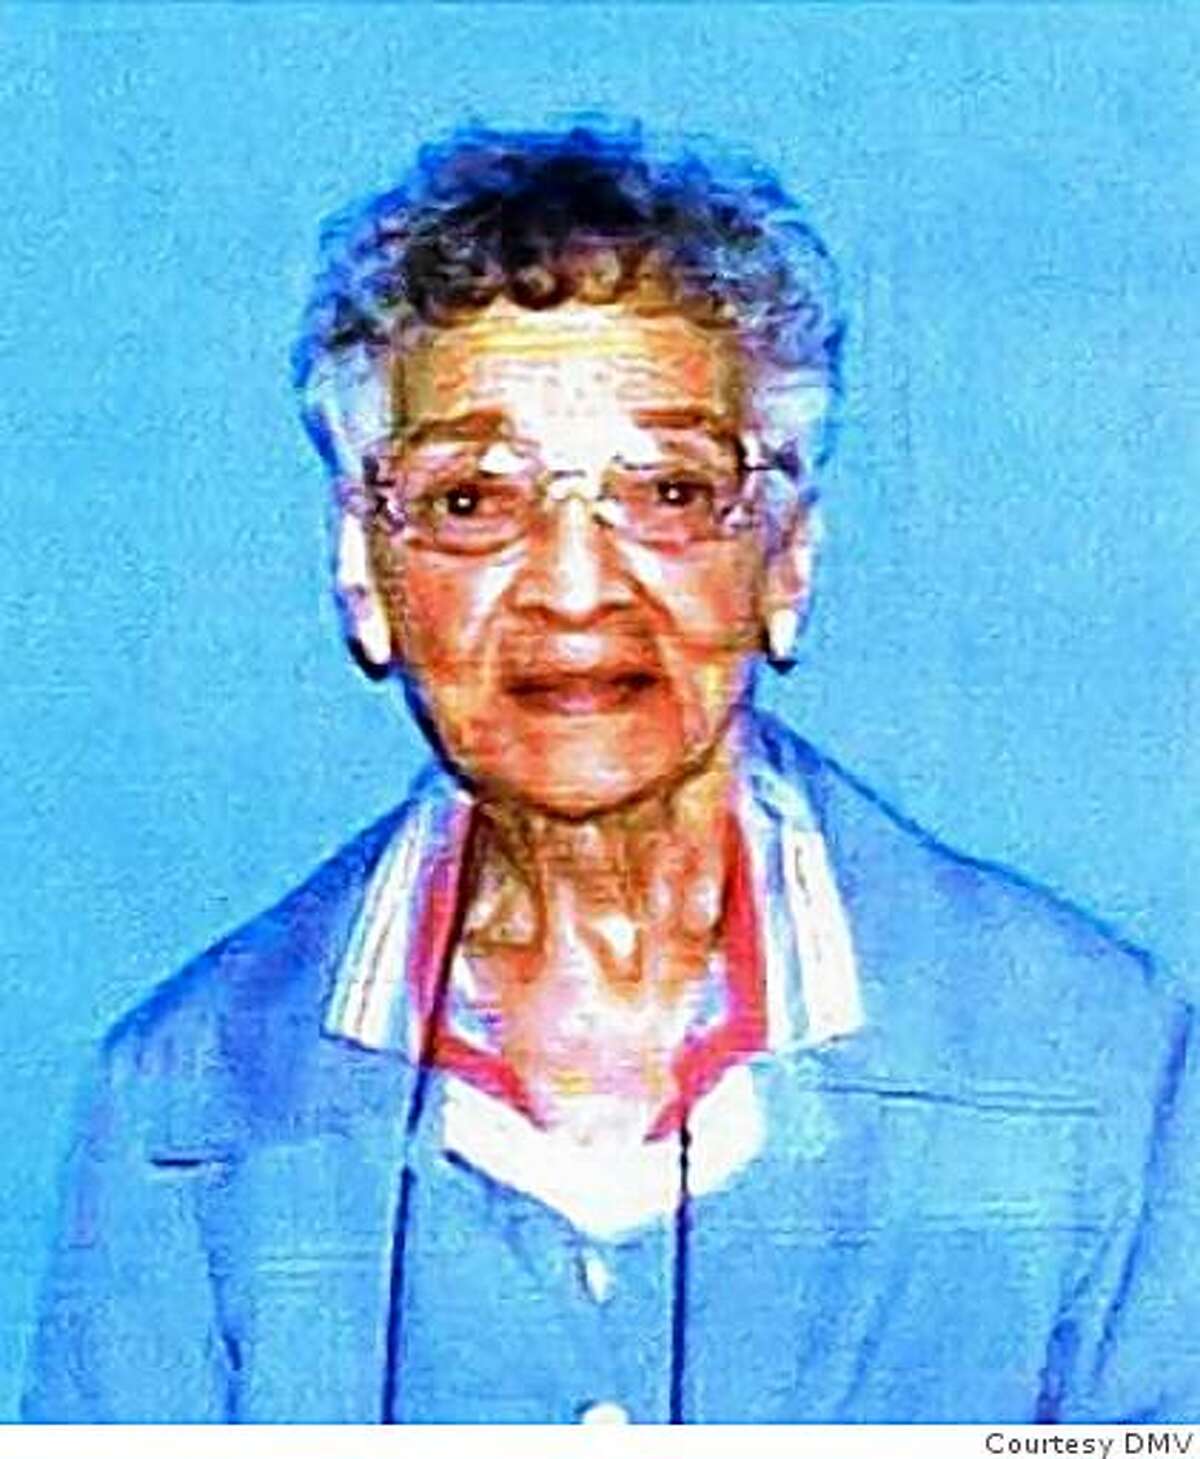 Ivarene Lett, a 97-year-old Oakland resident, was found beaten to death in her apartment on May 11. Oakland police said they believed she is the city's oldest homicide victim.